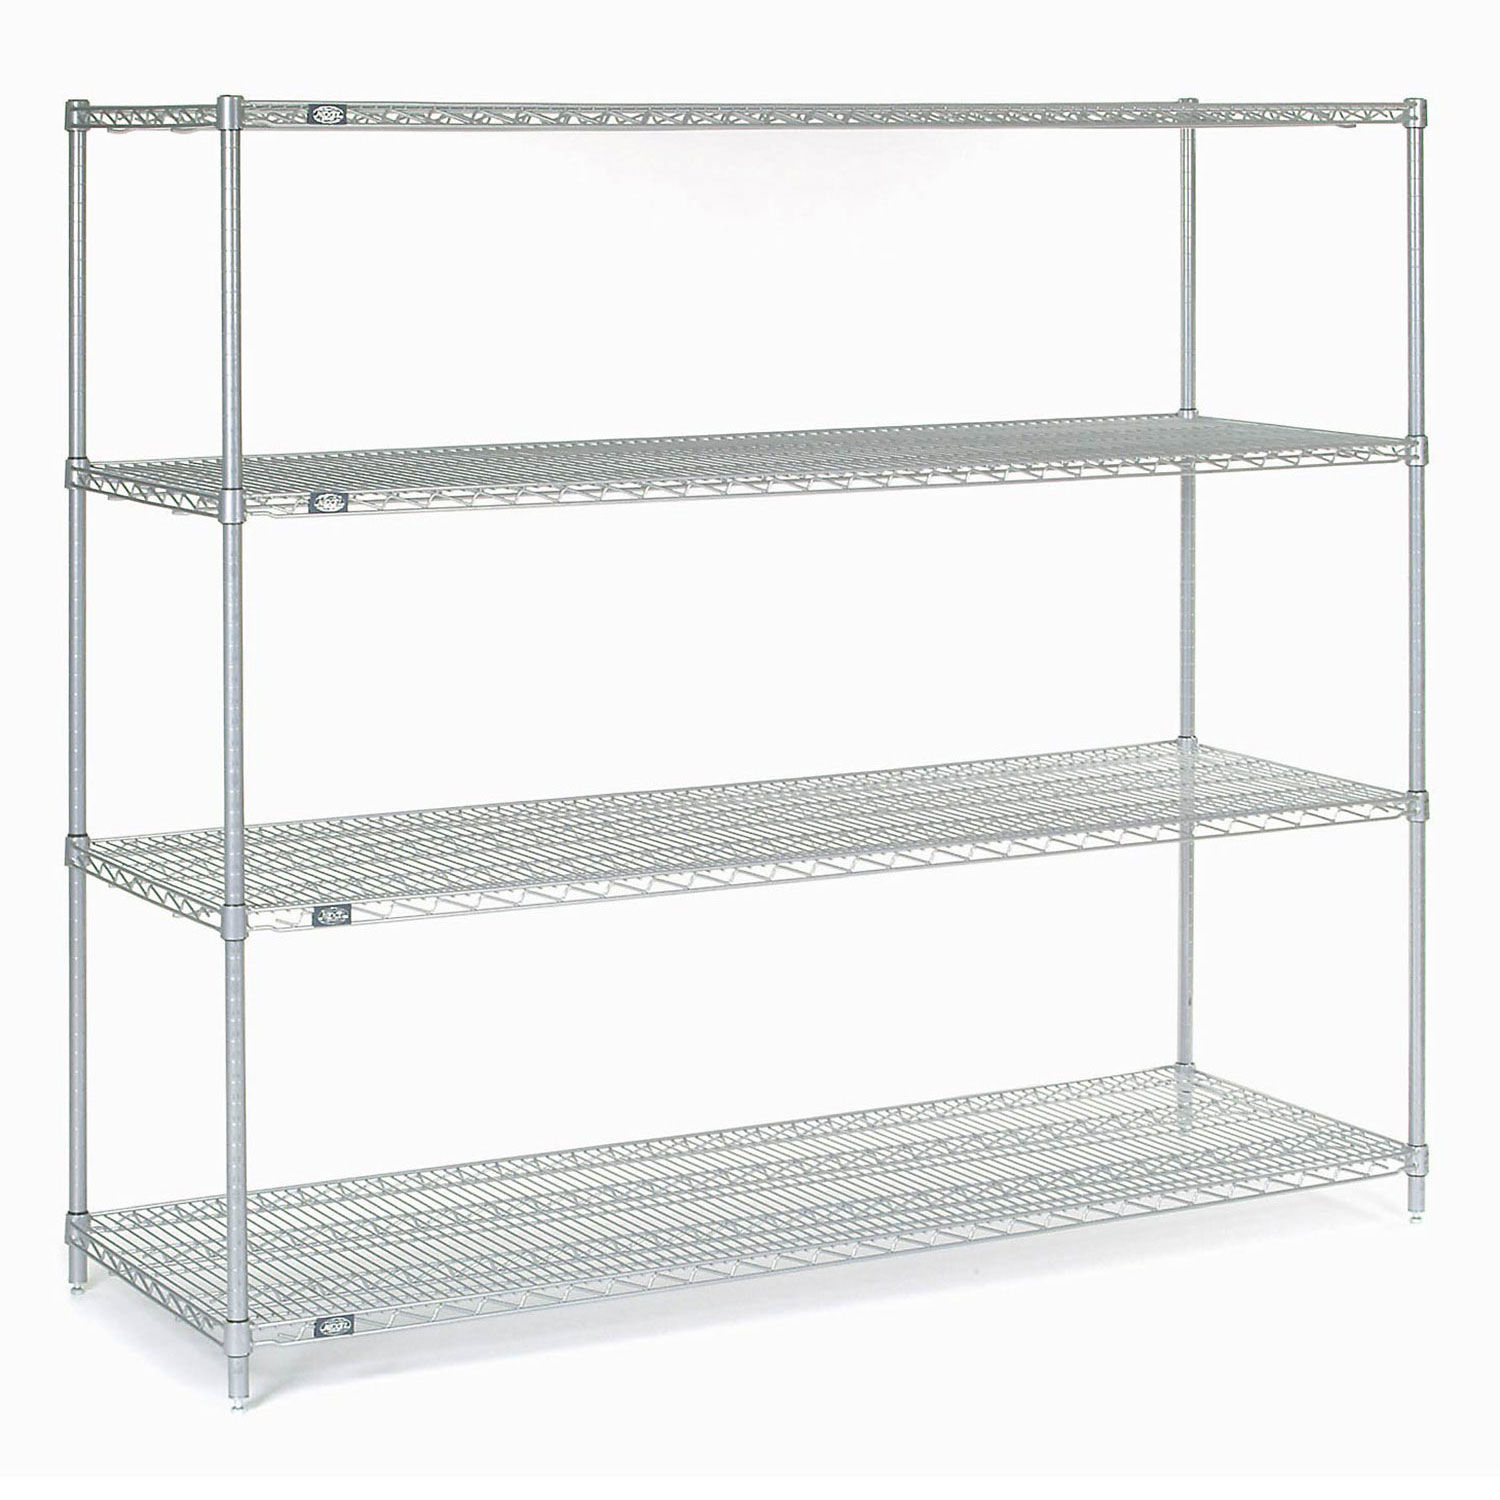 Stainless Steel Wire Shelving, 72"W x 24"D x 86"H 710552501664 | eBay Stainless Steel Wire Shelf Rack